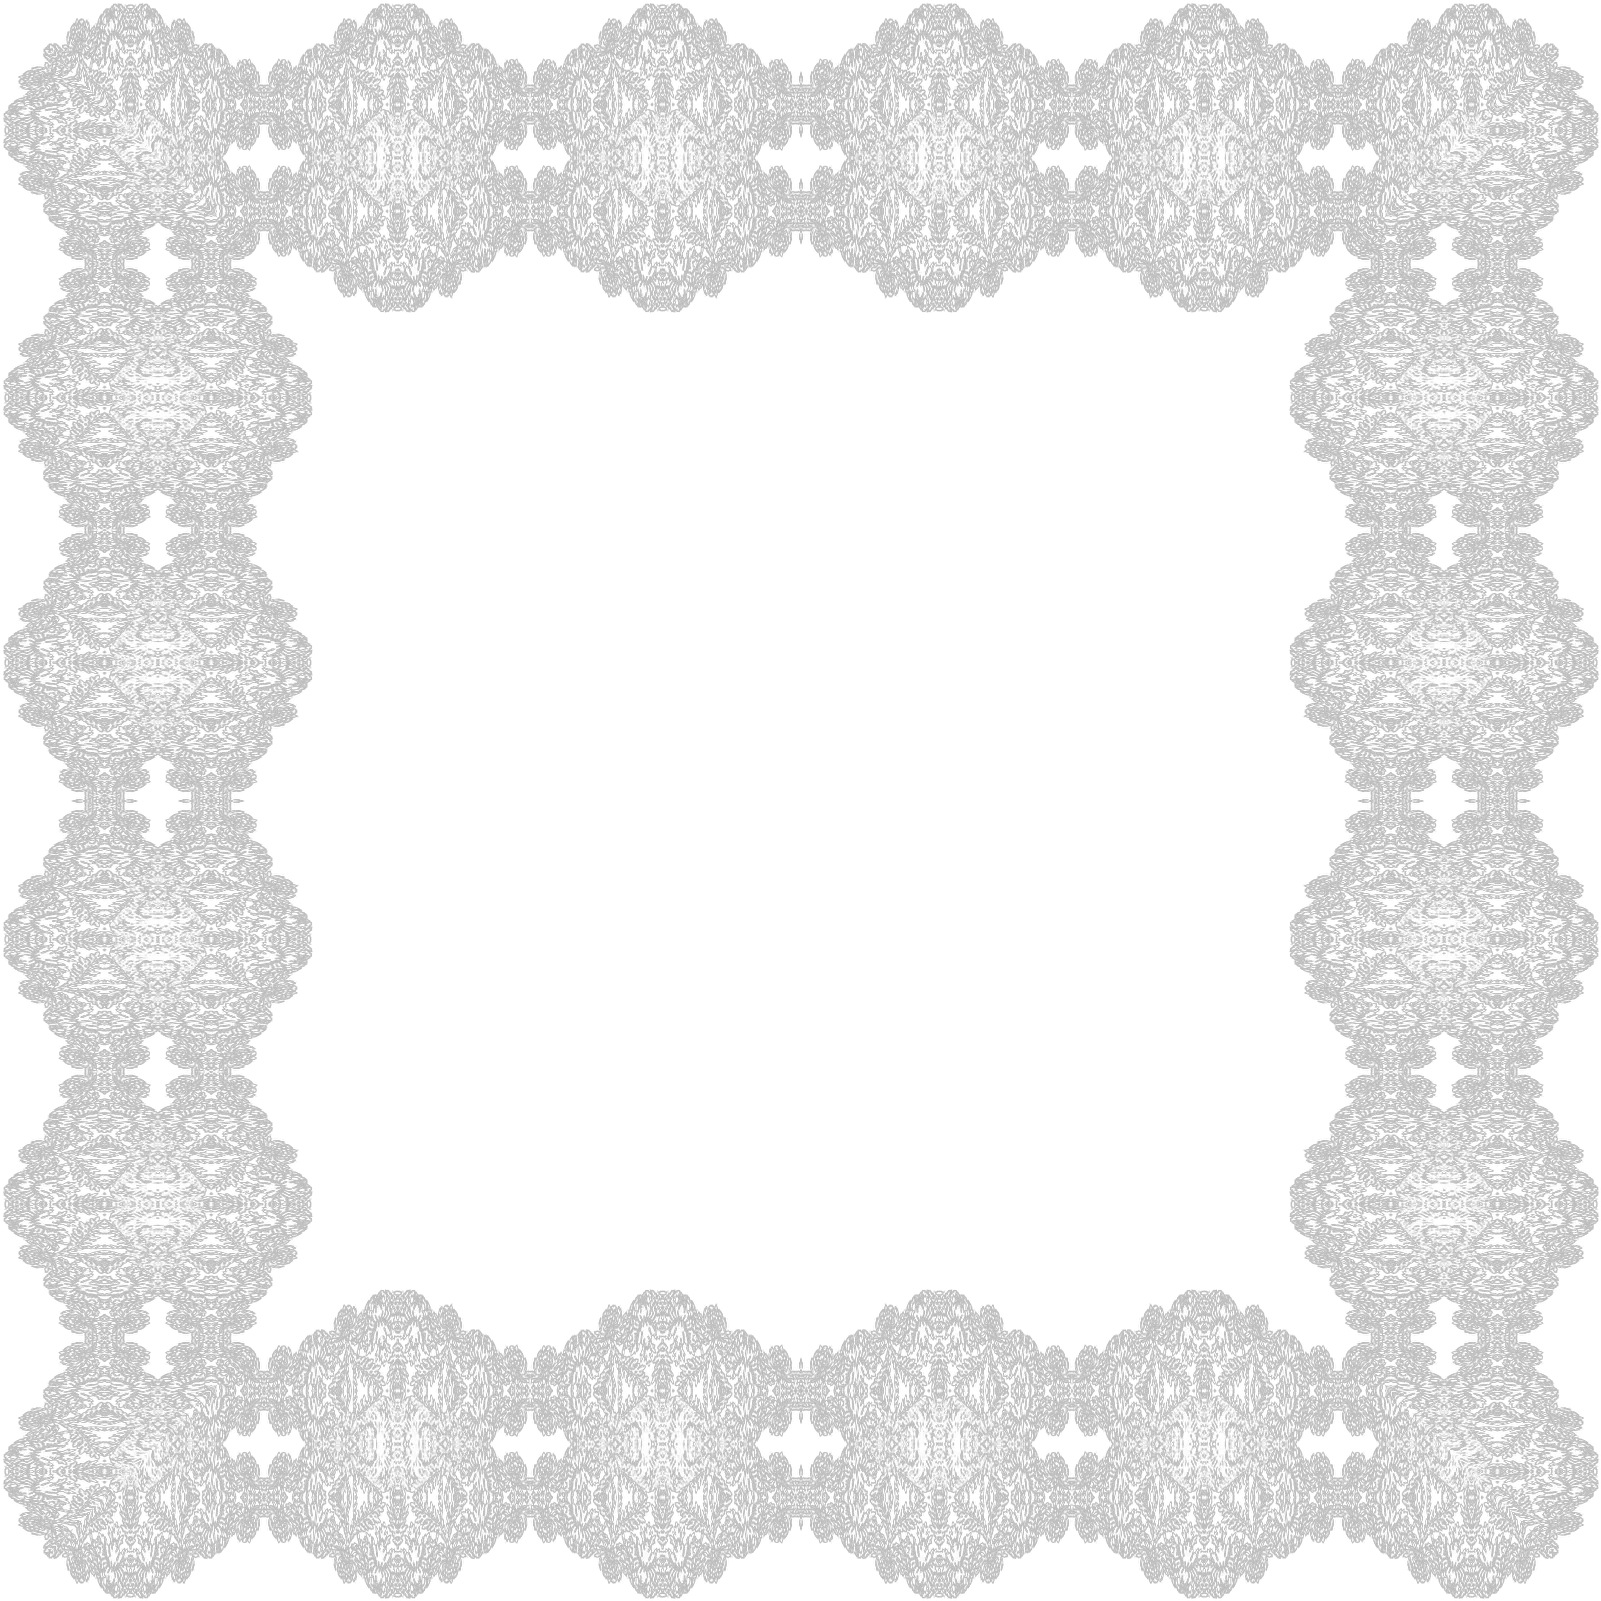 Png Lace Border Image Doily Lace Border Png